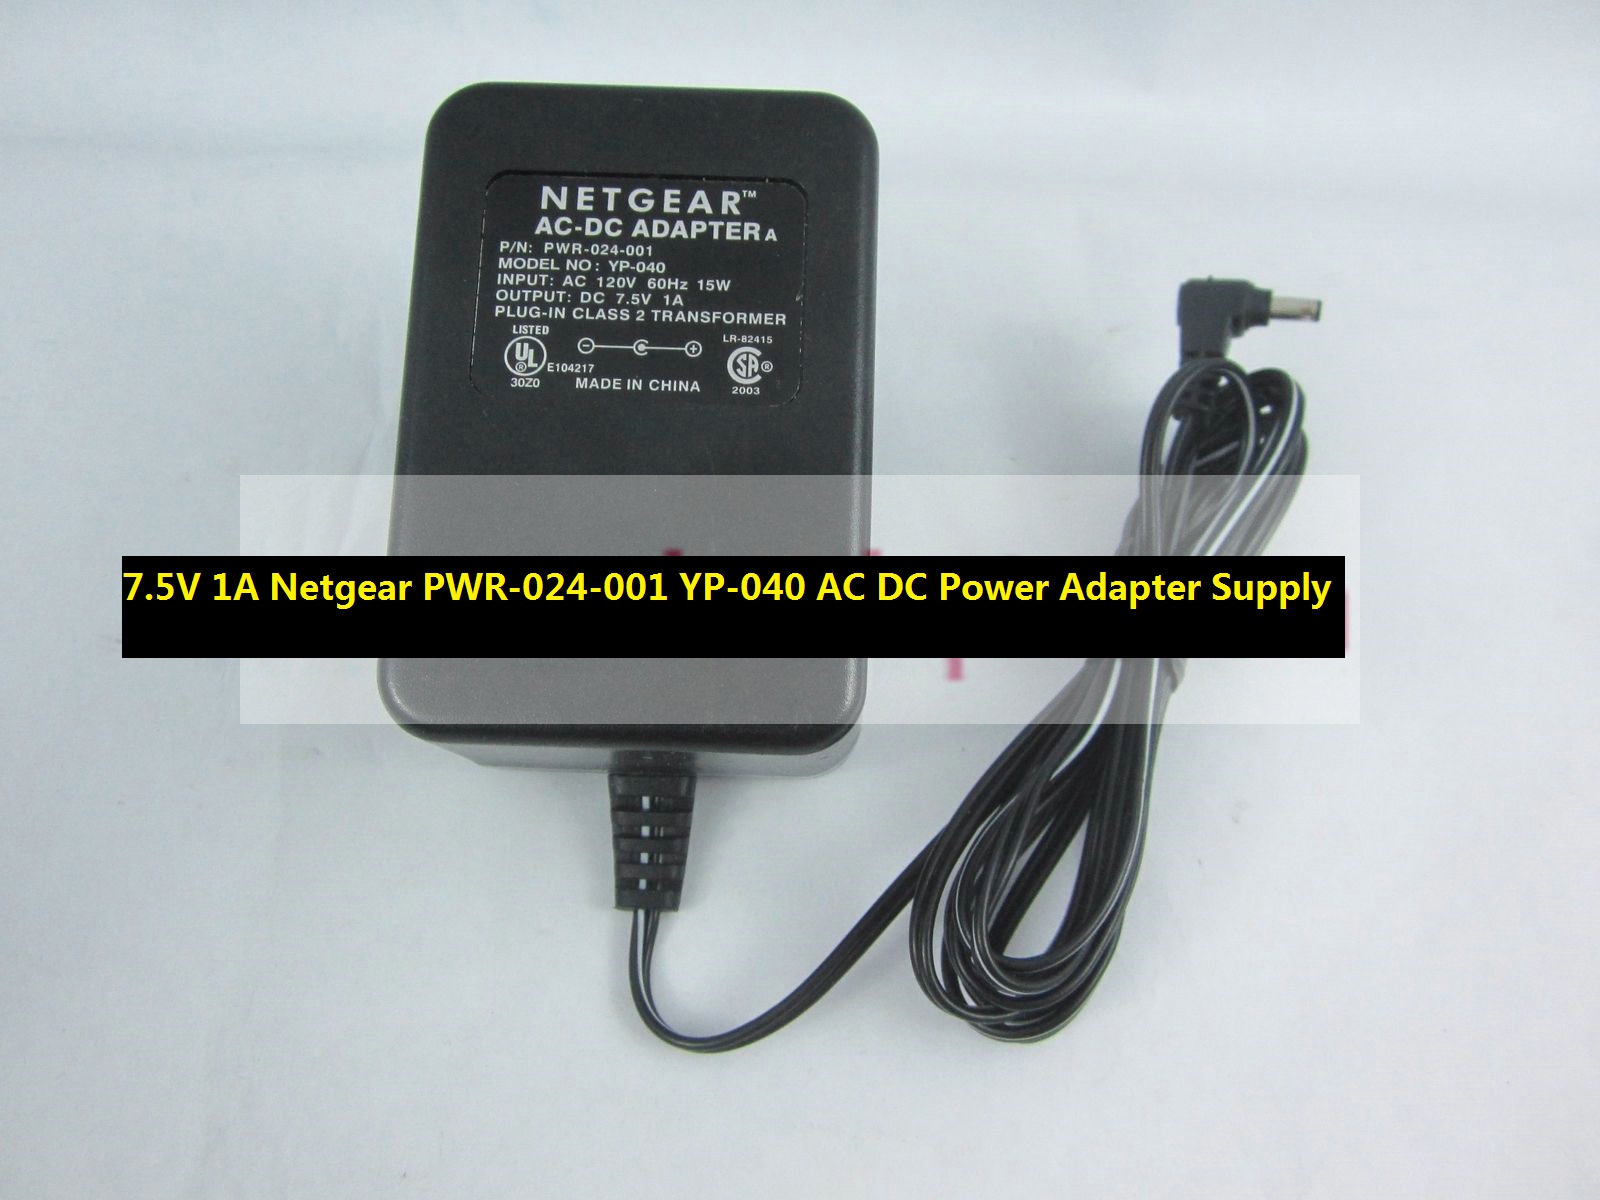 *Brand NEW* 7.5V 1A Netgear PWR-024-001 YP-040 AC DC Power Adapter Supply